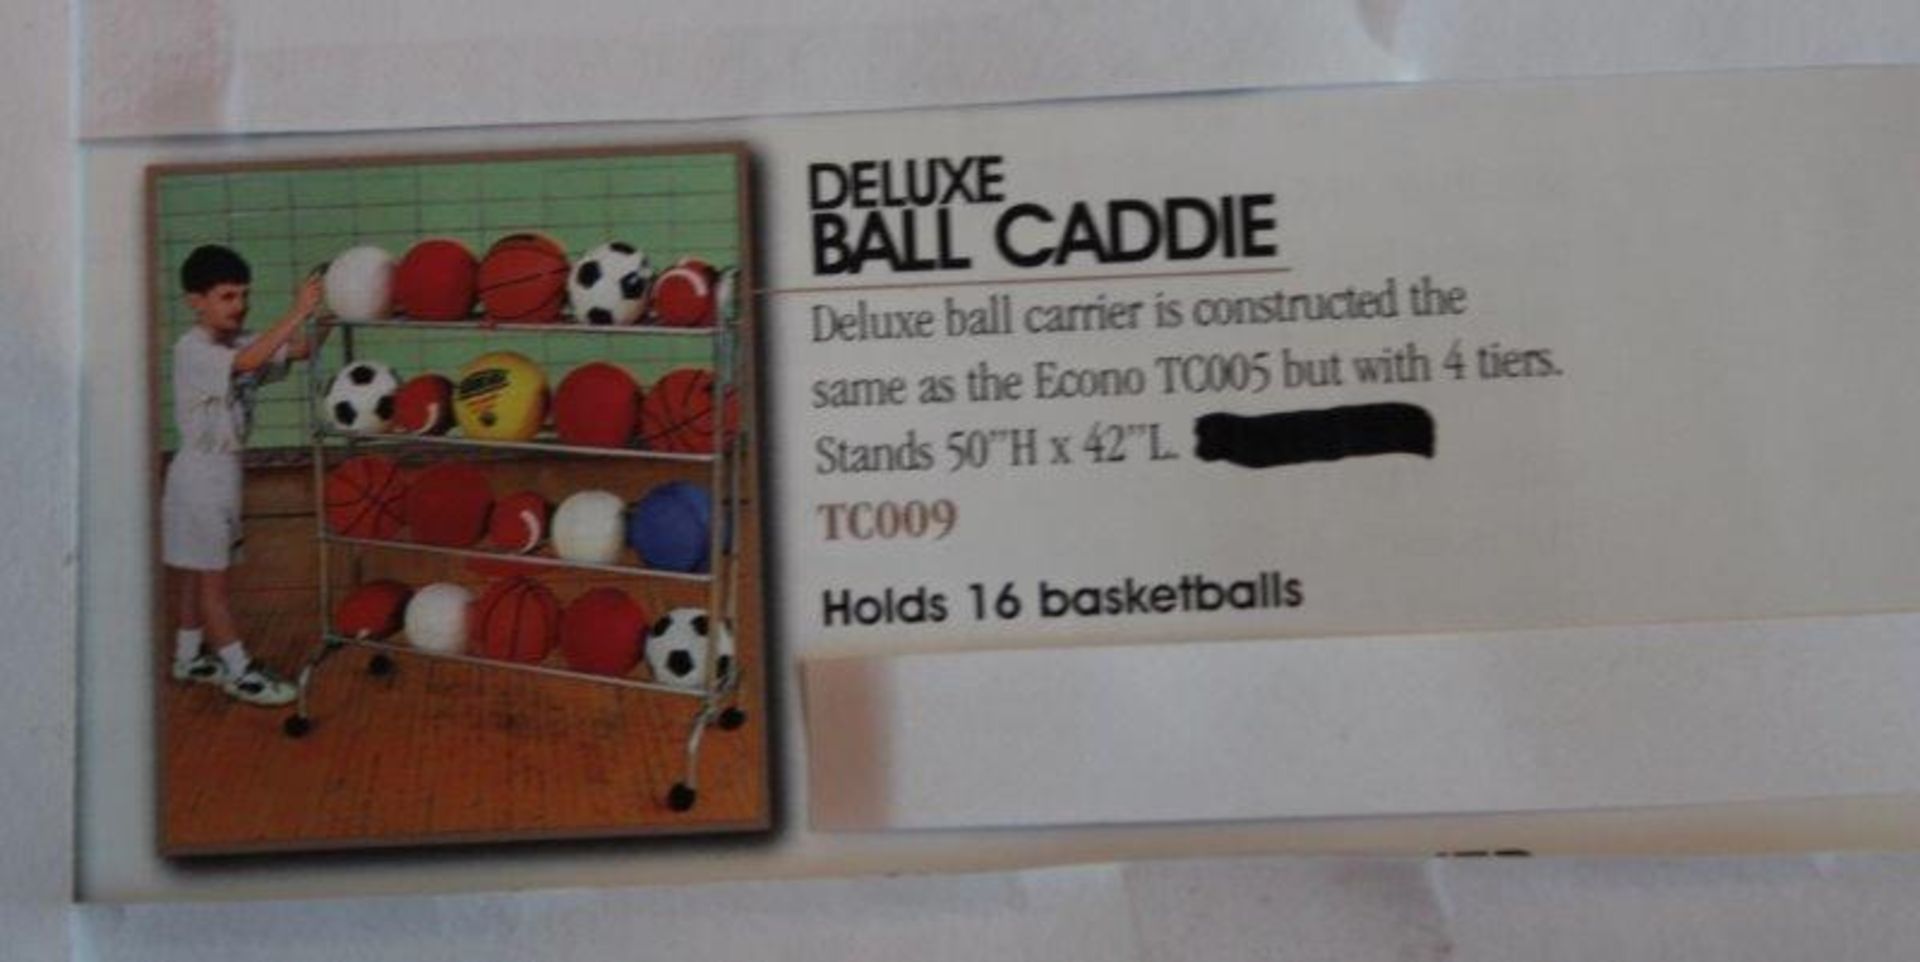 Lot of 2) MTC 009, Deluxe Ball Caddies - Image 2 of 2